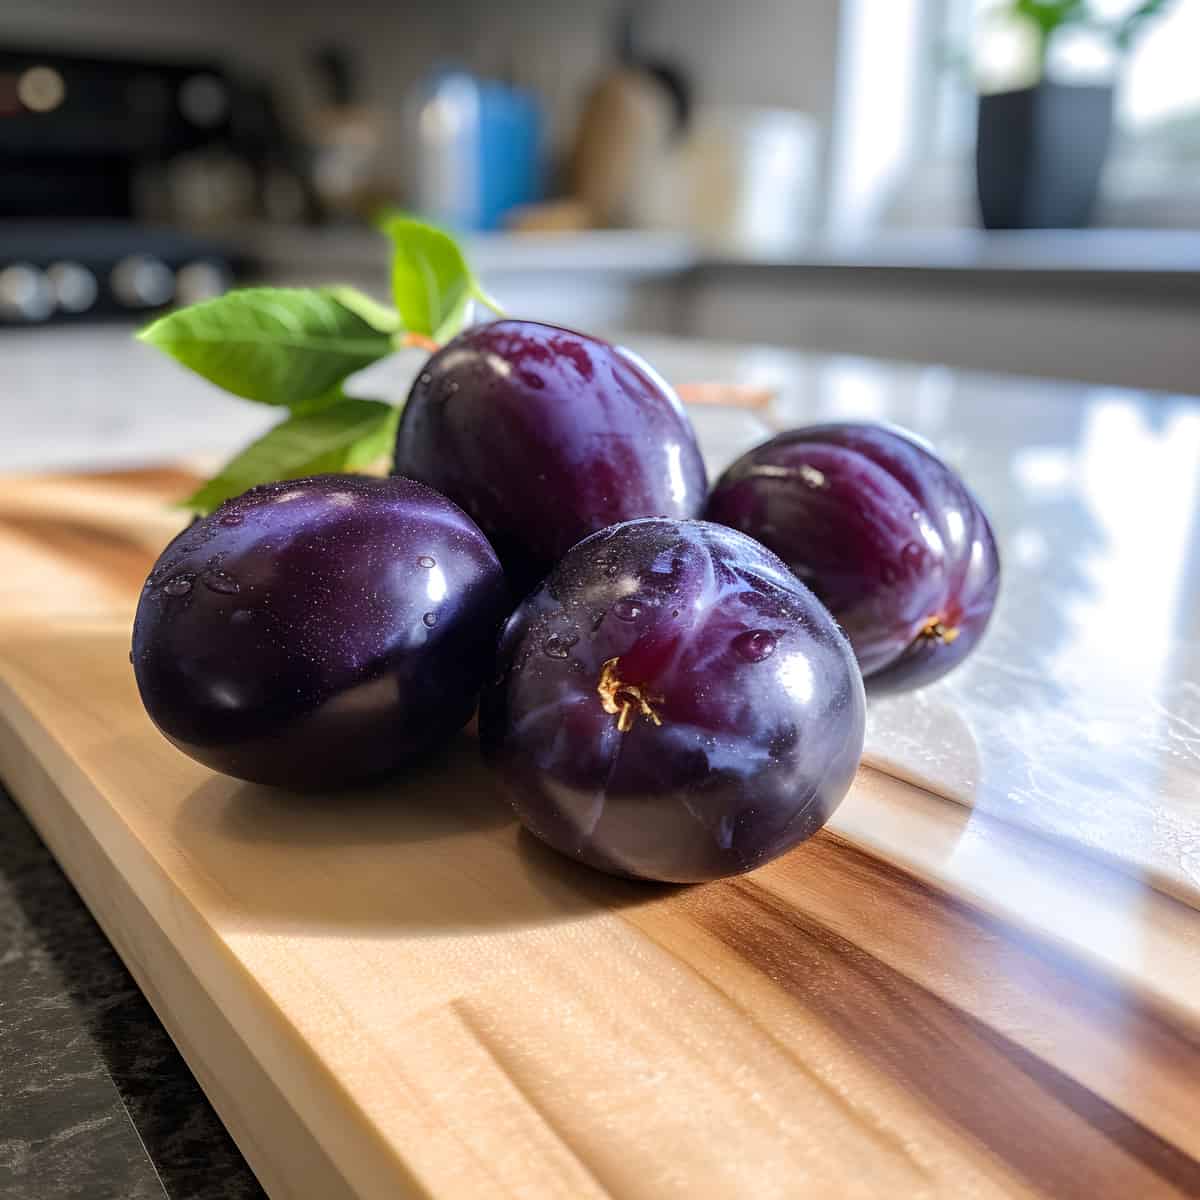 Murrays Plum on a kitchen counter